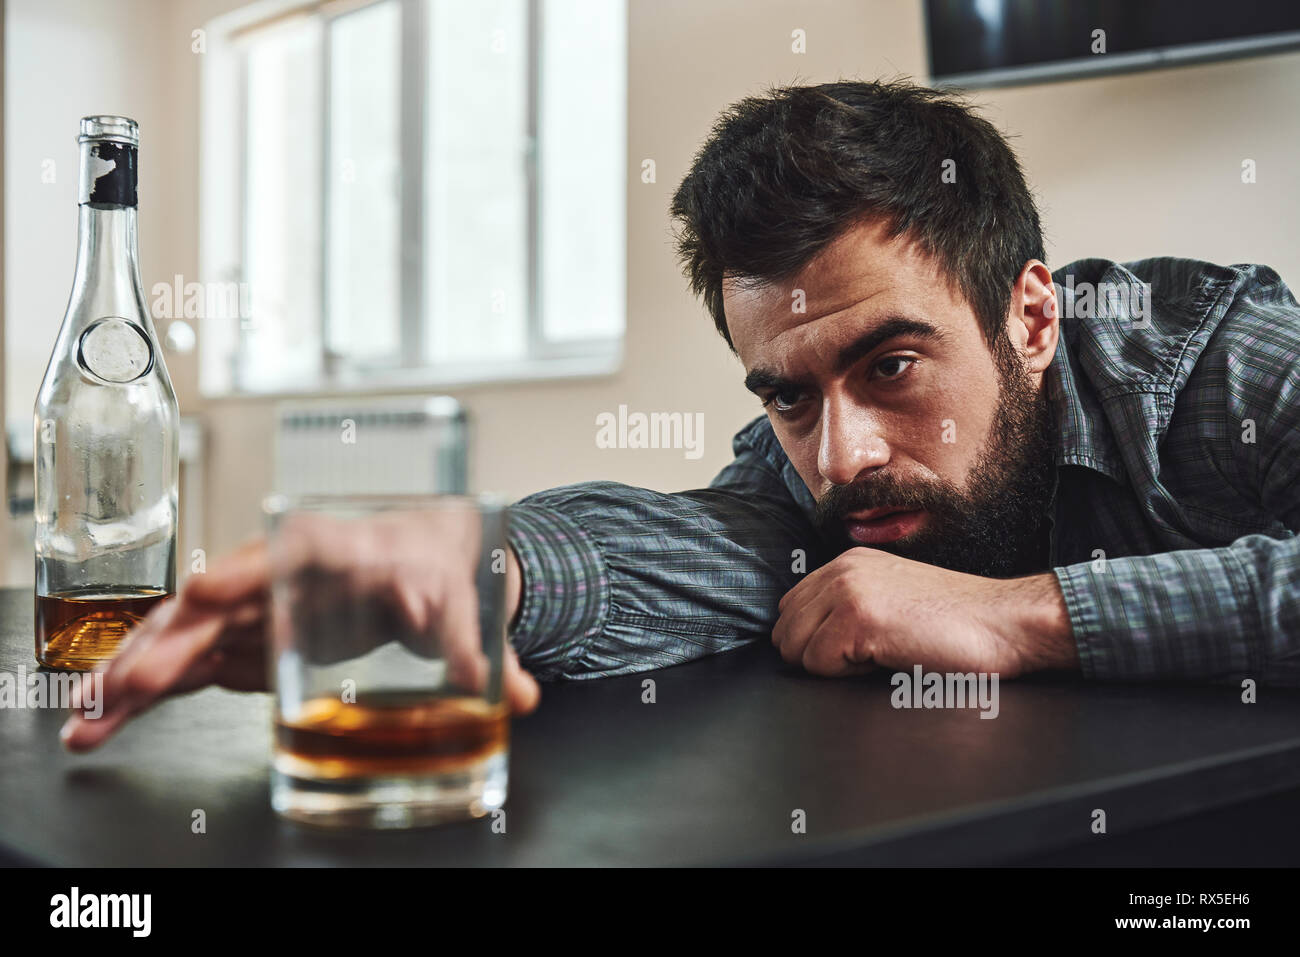 Dark-haired, sad and wasted alcoholic man lying on a table, in the kitchen. He looks at a glass of whiskey and tries to reach it. Looking depressed, l Stock Photo